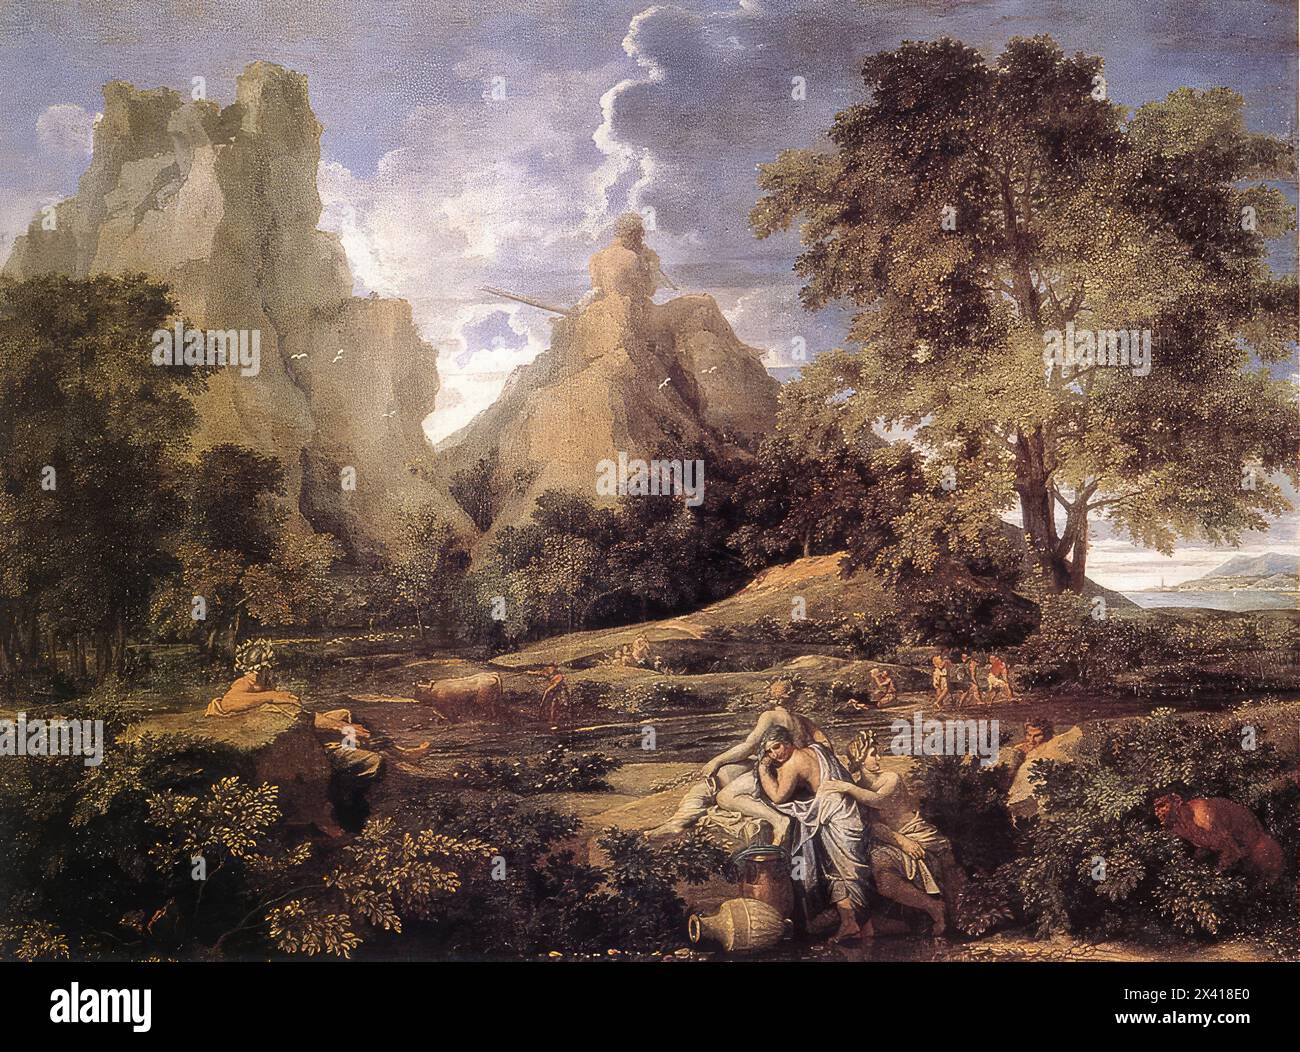 POUSSIN, Nicolas (b. 1594, Les Andelys, d. 1665, Roma)  Landscape with Polyphemus 1648 Oil on canvas, 150 x 199 cm The Hermitage, St. Petersburg  This picture marks the beginning of Poussin's final period, that in which poetry rises to an all-embracing feeling for the world - still, however, interpreted through a mythological guise.  The subject was borrowed from 'Metamorphoses' by Ovid. A terrible one-eyed giant Polyphemus anamoured of nymph Galathea is singing of his love on a pipe.       --- Keywords: --------------  Author: POUSSIN, Nicolas Title: Landscape with Polyphemus Time-line: 1601- Stock Photo